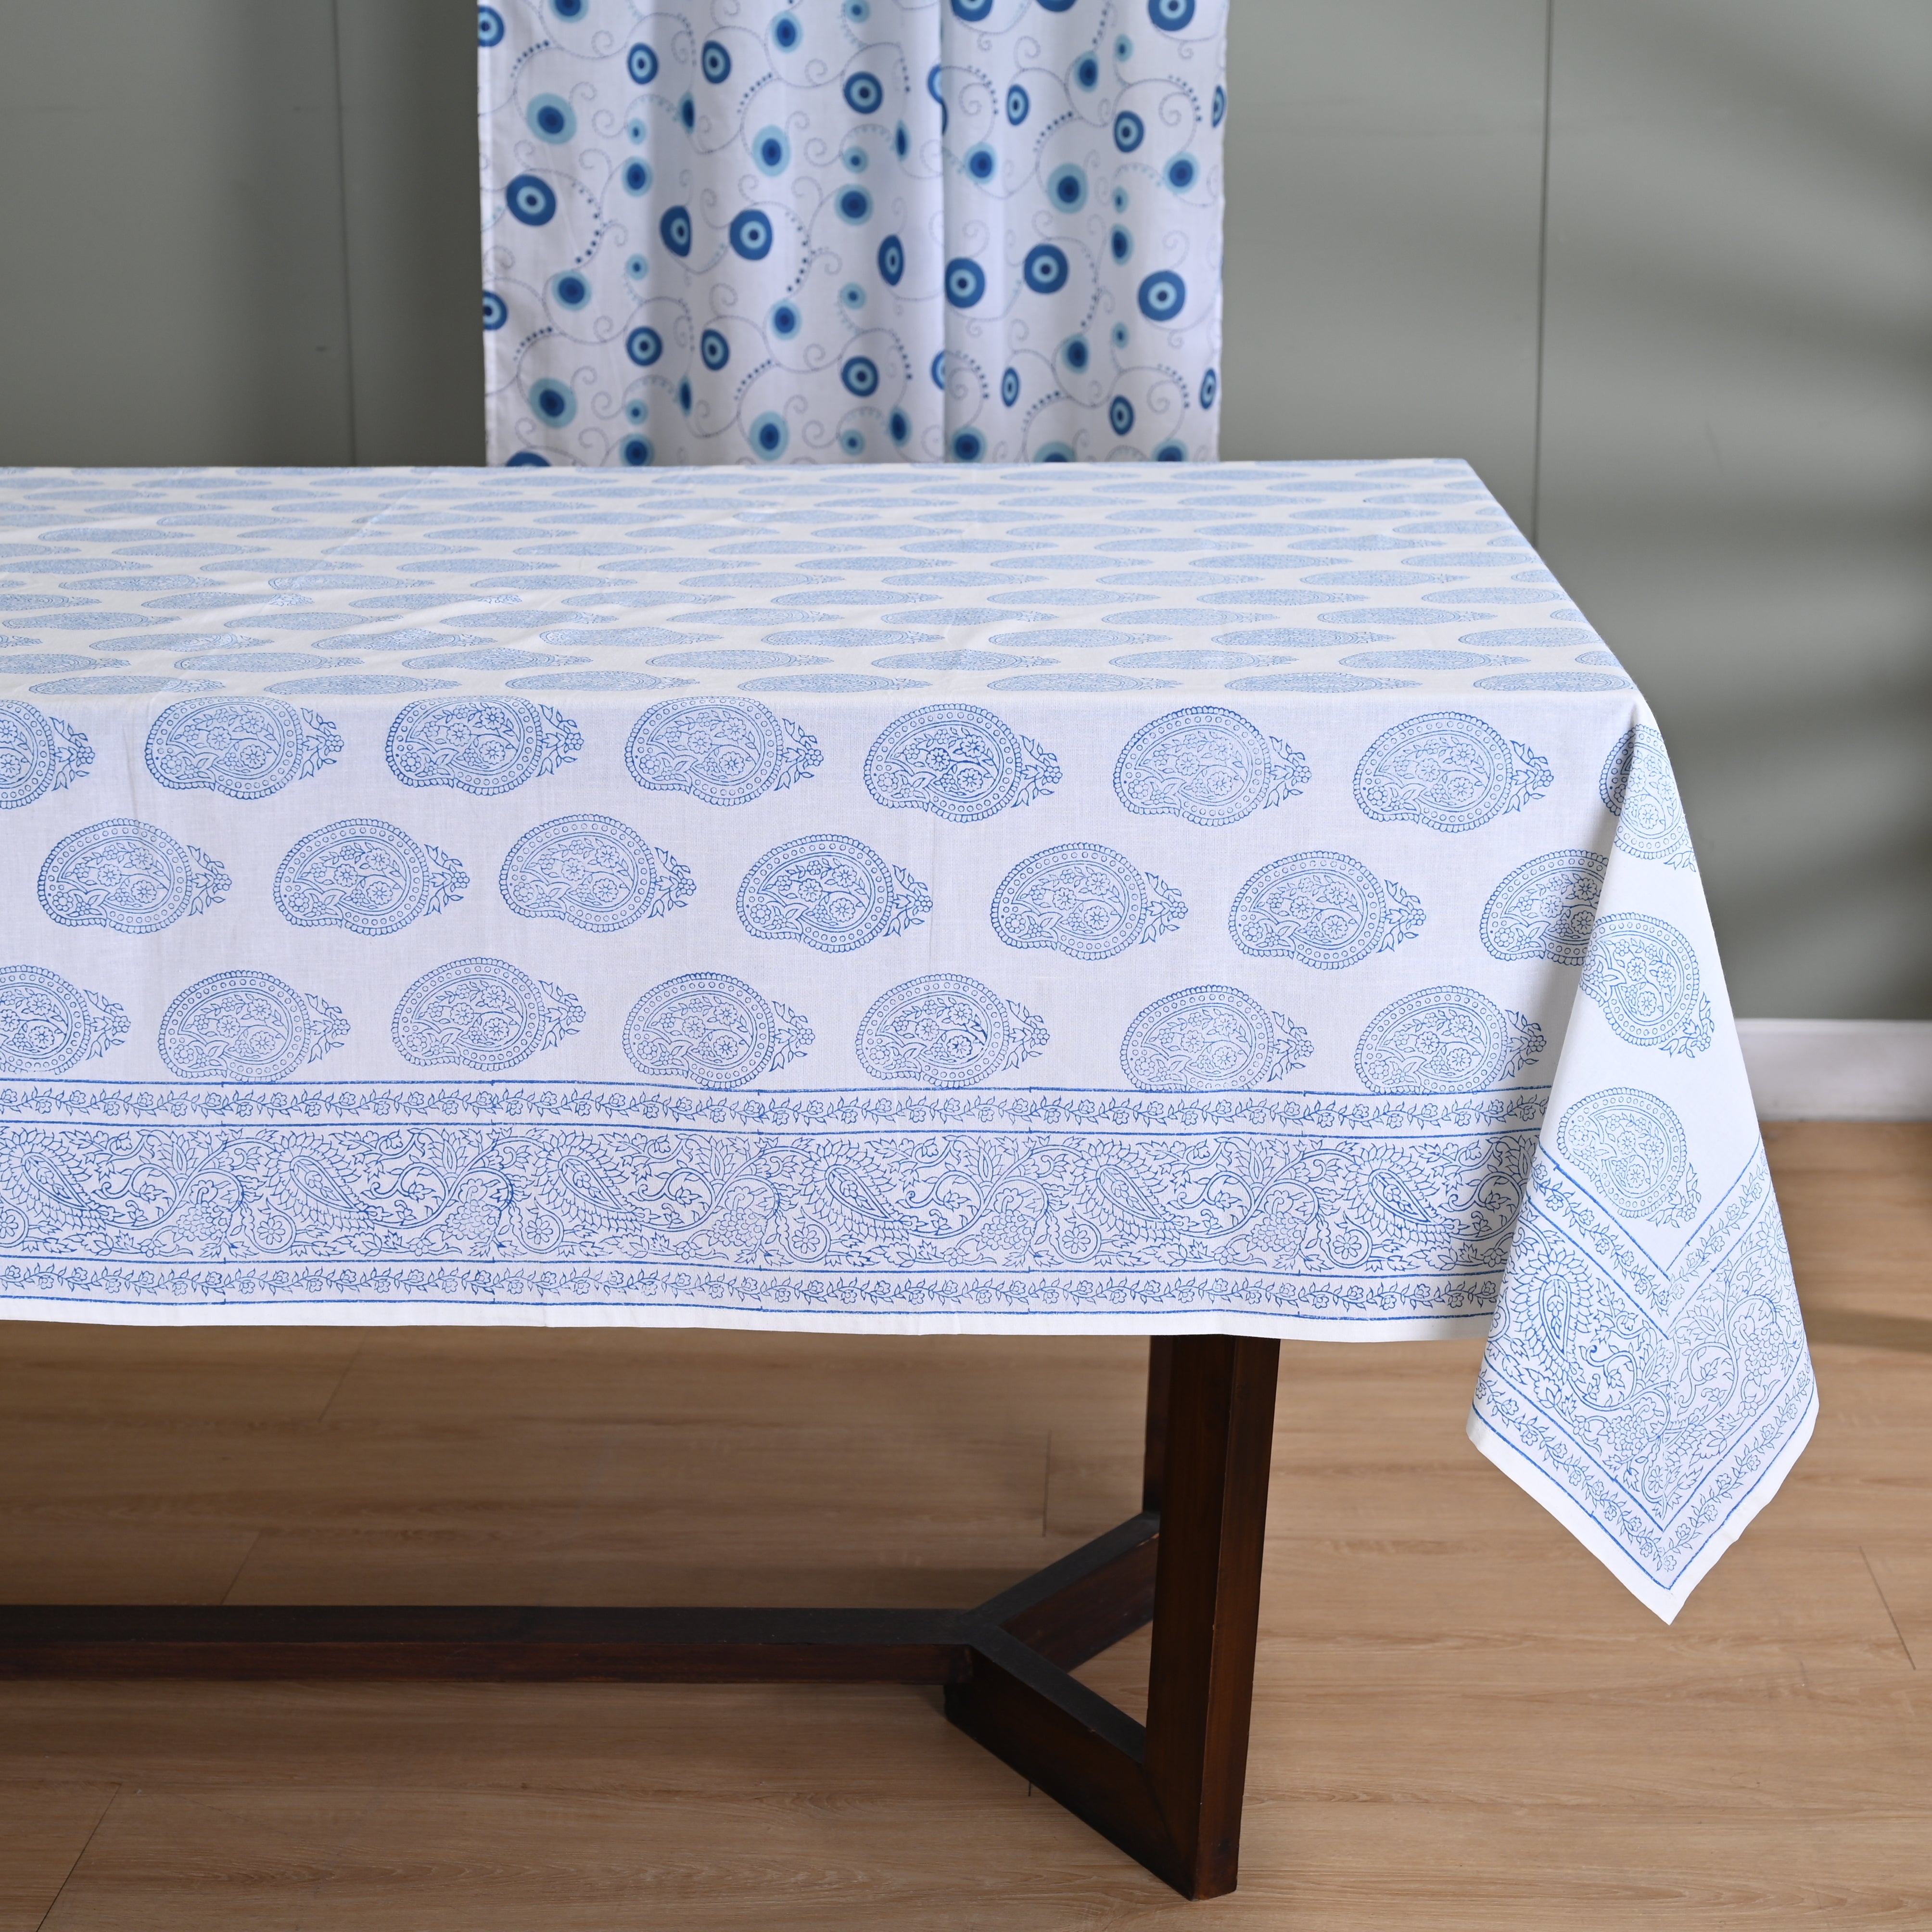 Stately Paisely 6 Seate Table Cover